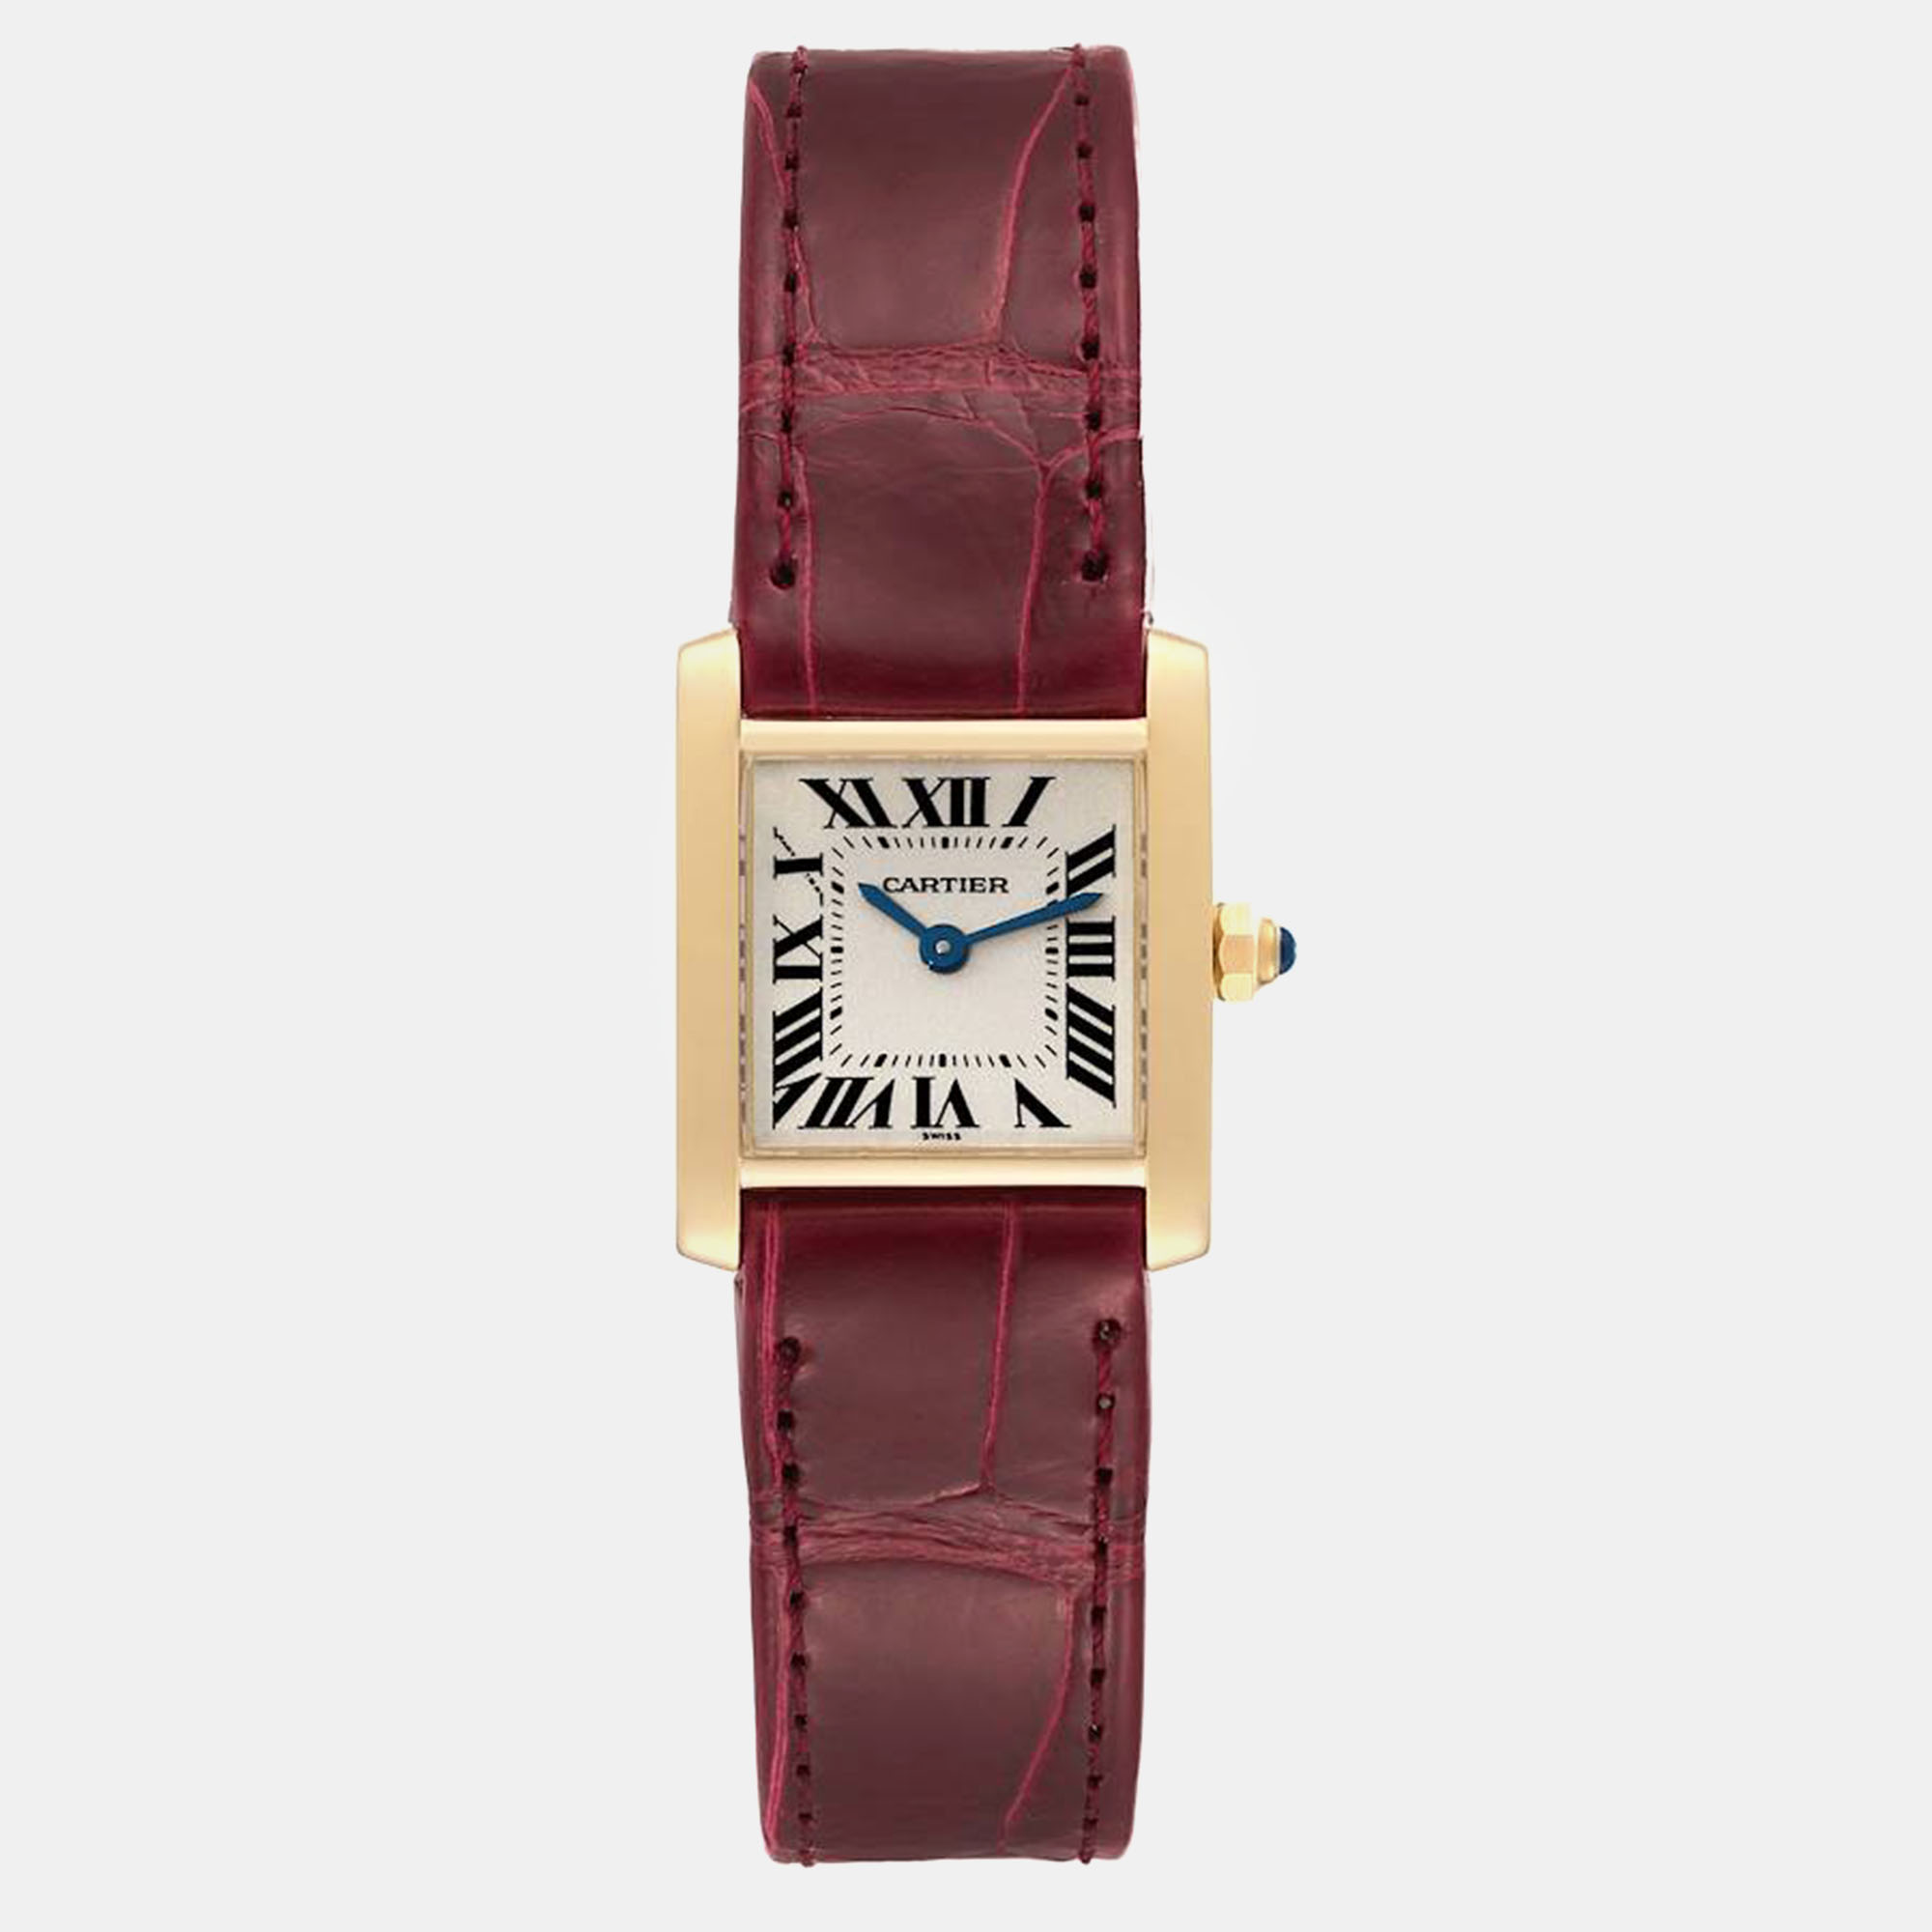 

Cartier Tank Francaise Yellow Gold Burgundy Strap Ladies Watch W5000256 20.0 mm x 25.0 mm, Silver